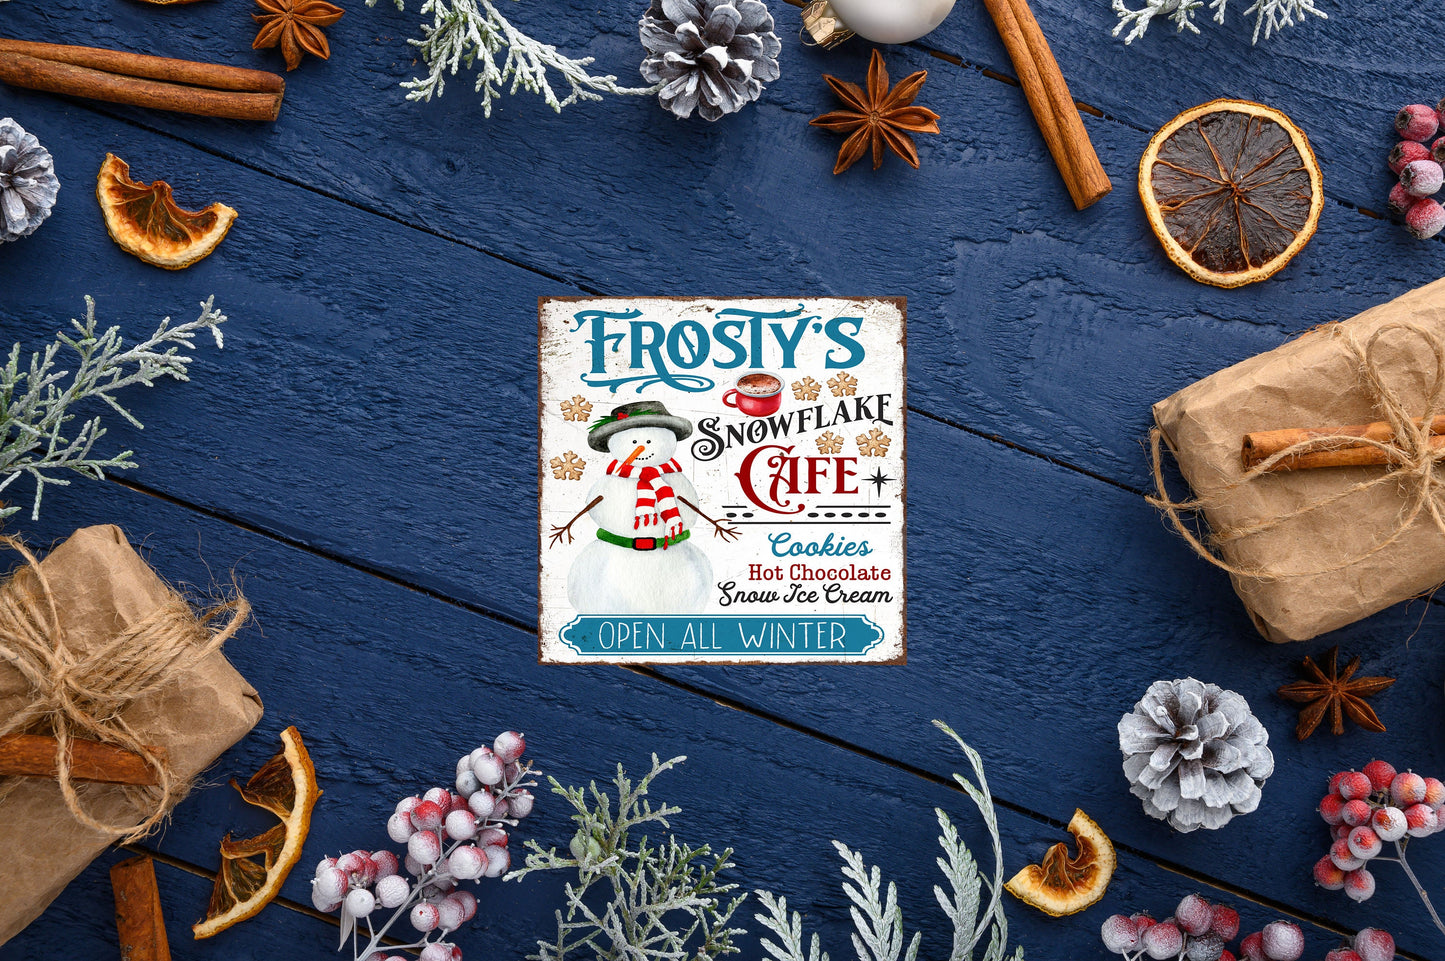 Frosty's Snowflake Cafe Printed Handmade Wood Christmas Ornament Mini Sign